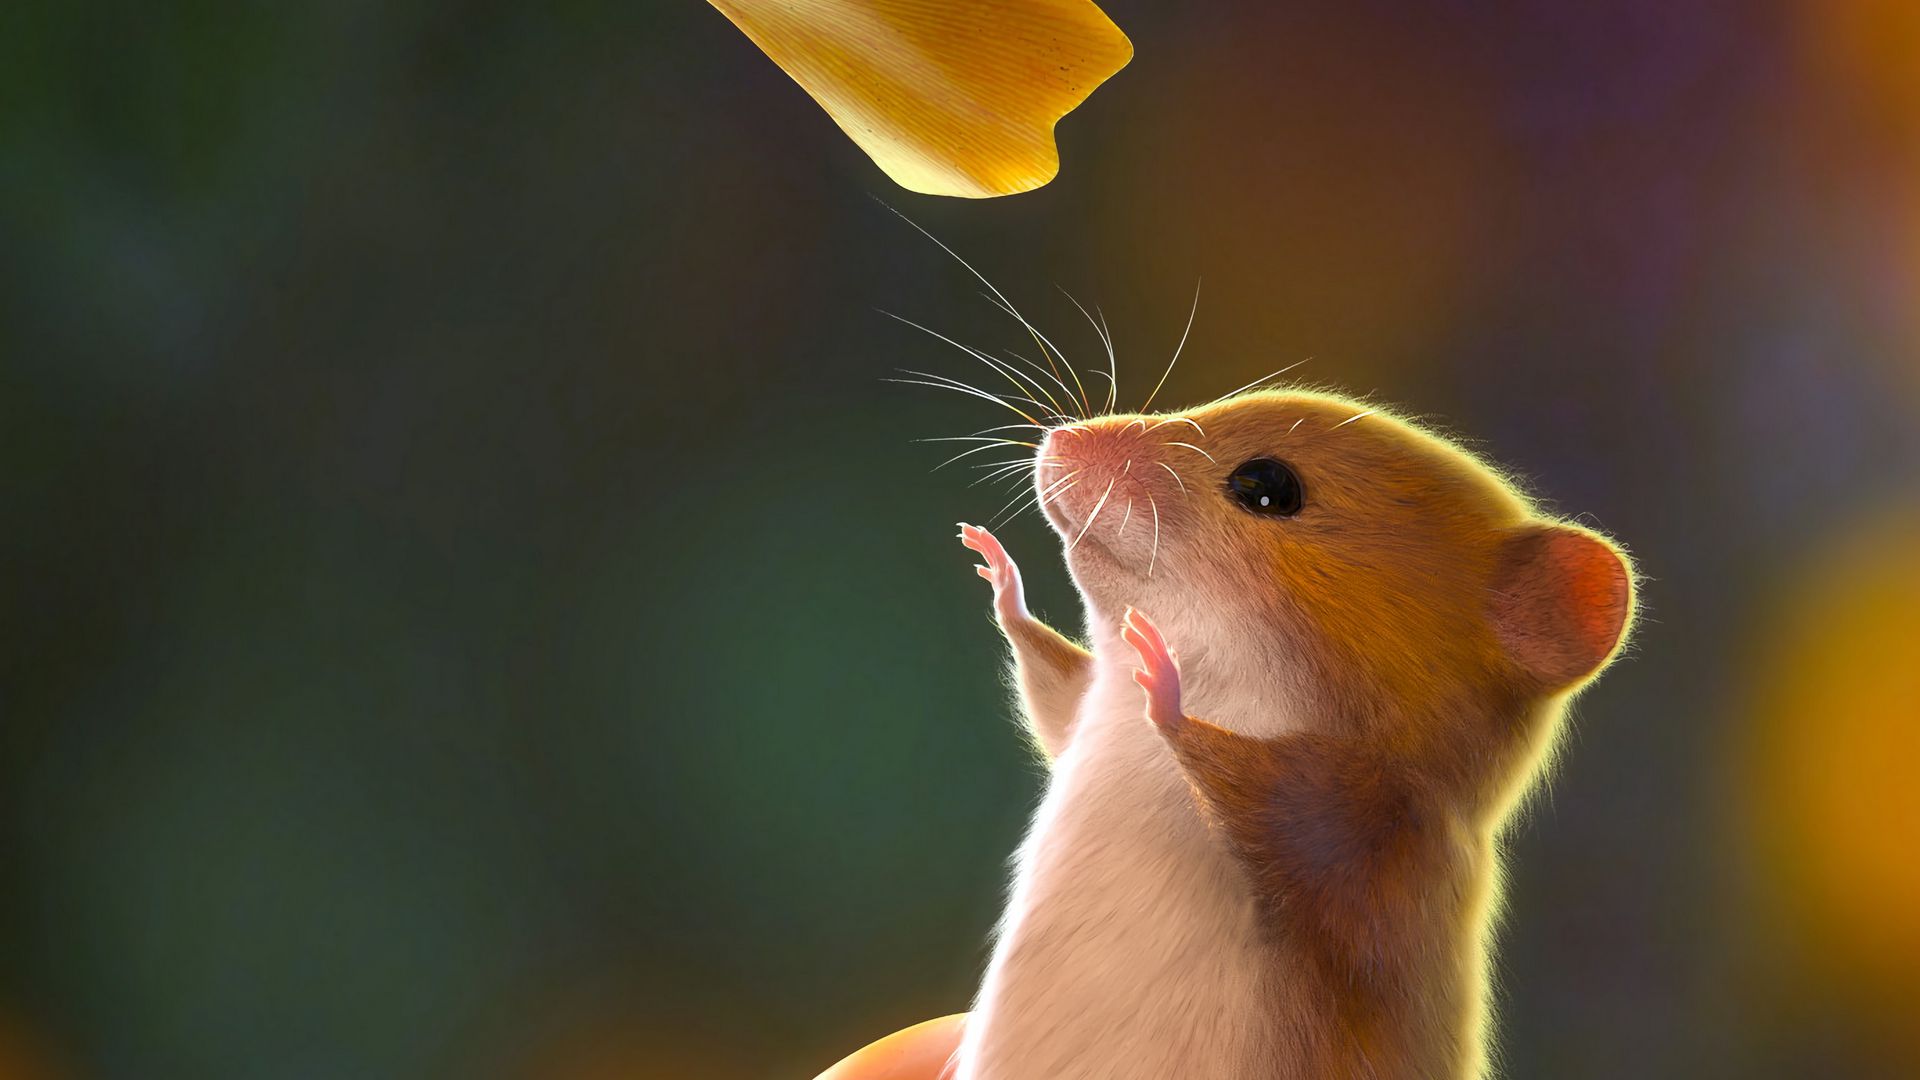 Download wallpaper 1920x1080 mouse, rodent, cute, leaves, art full hd,  hdtv, fhd, 1080p hd background